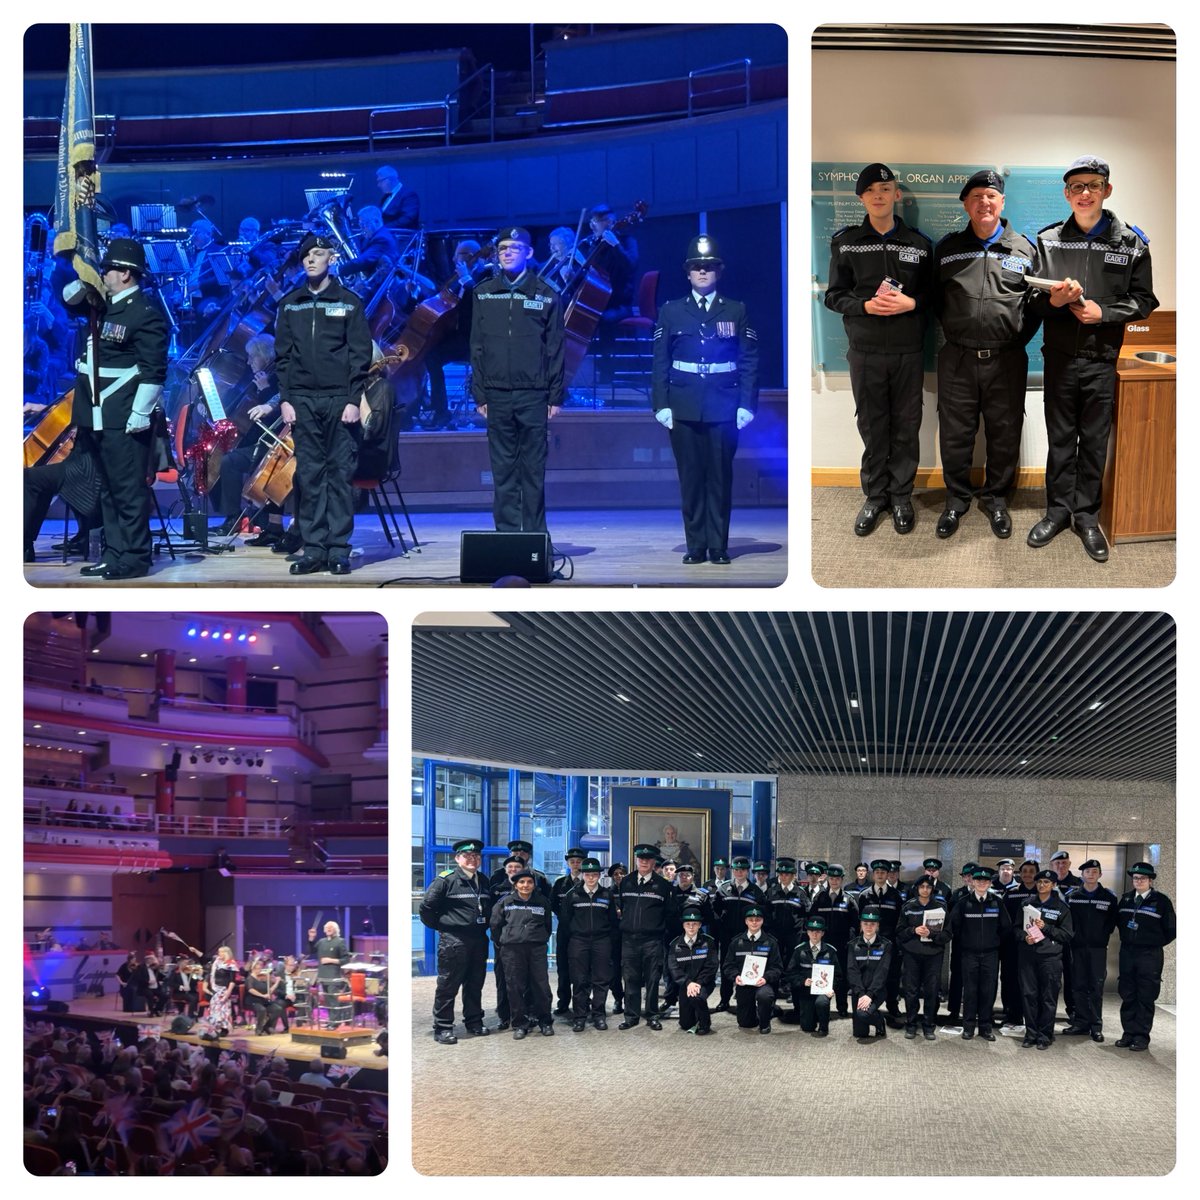 WMP Cadets were honoured to support @policeorchestra on Saturday evening. Working alongside @StaffsCadets and @WMPolice honour guard, we raised money for the charity and greeted attendees, as well as getting to watch the amazing performance! @YOUWestMids #workingtogether #charity